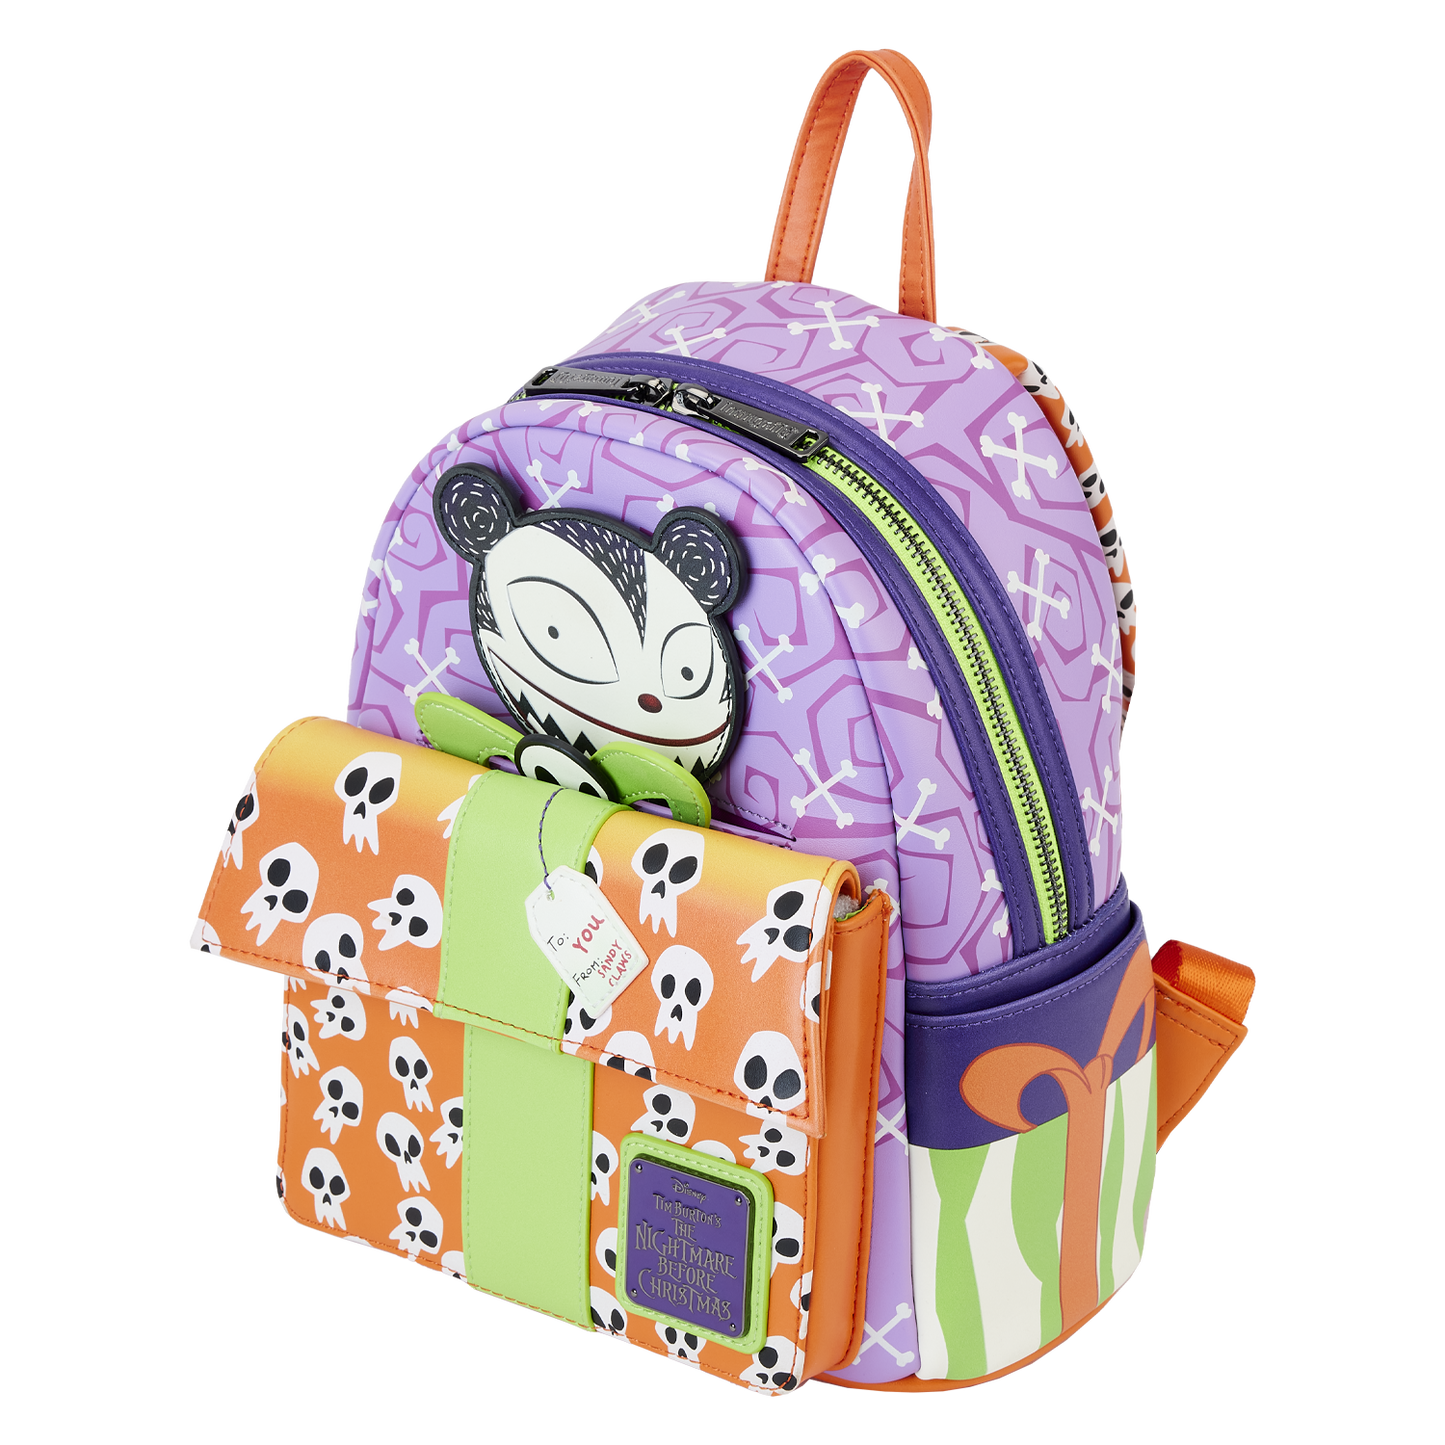 Nightmare Before Christmas Scary Teddy Present Mini Backpack